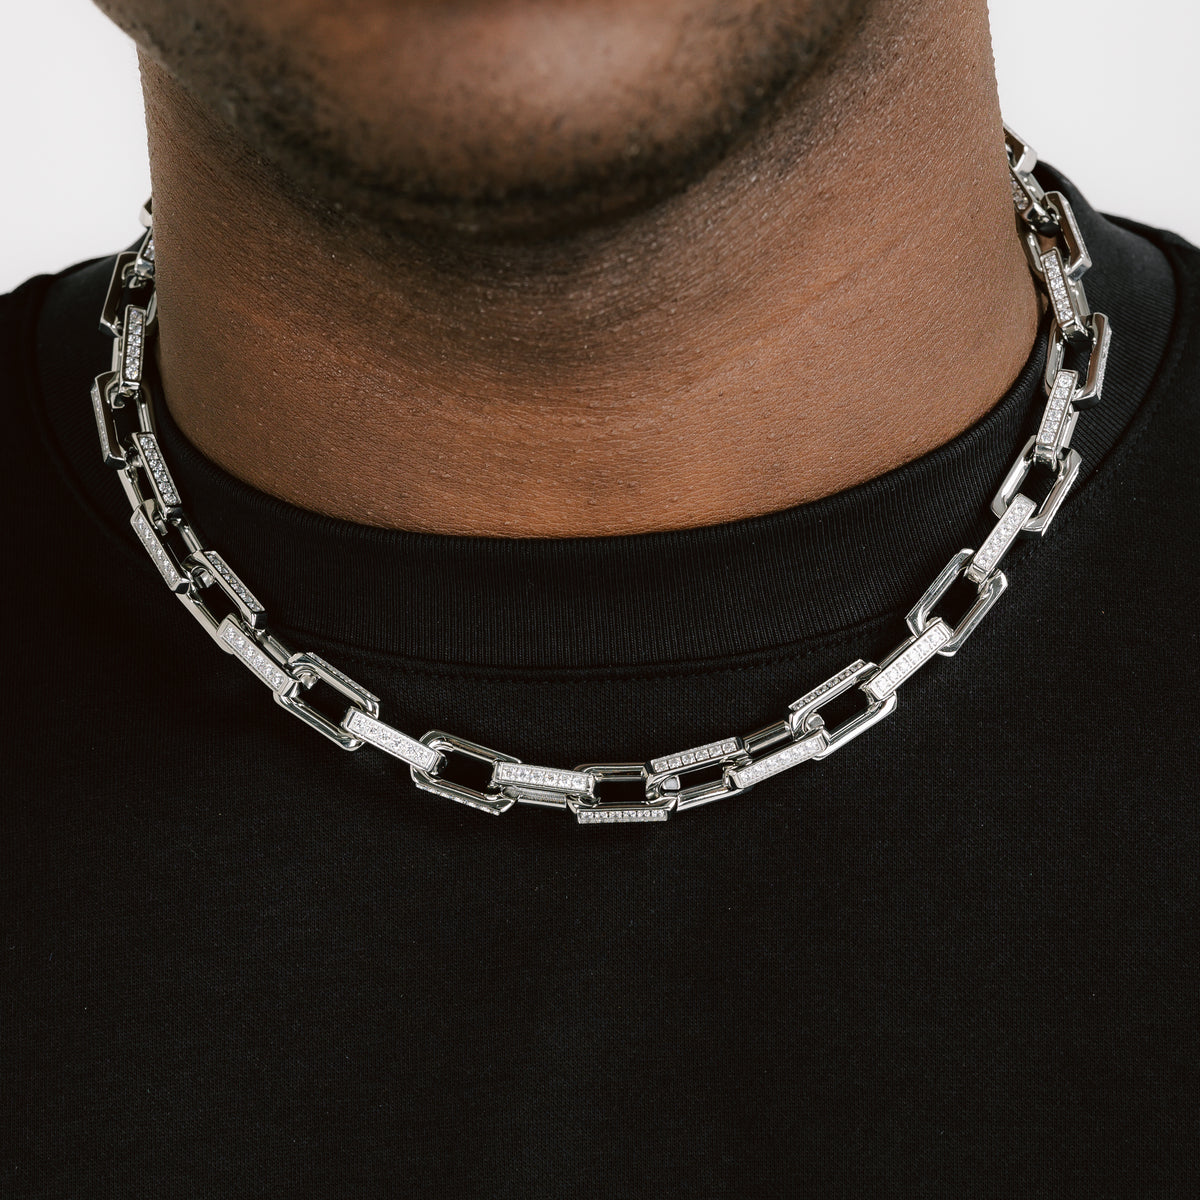 14K Solid White Gold Chain. Made in Italy